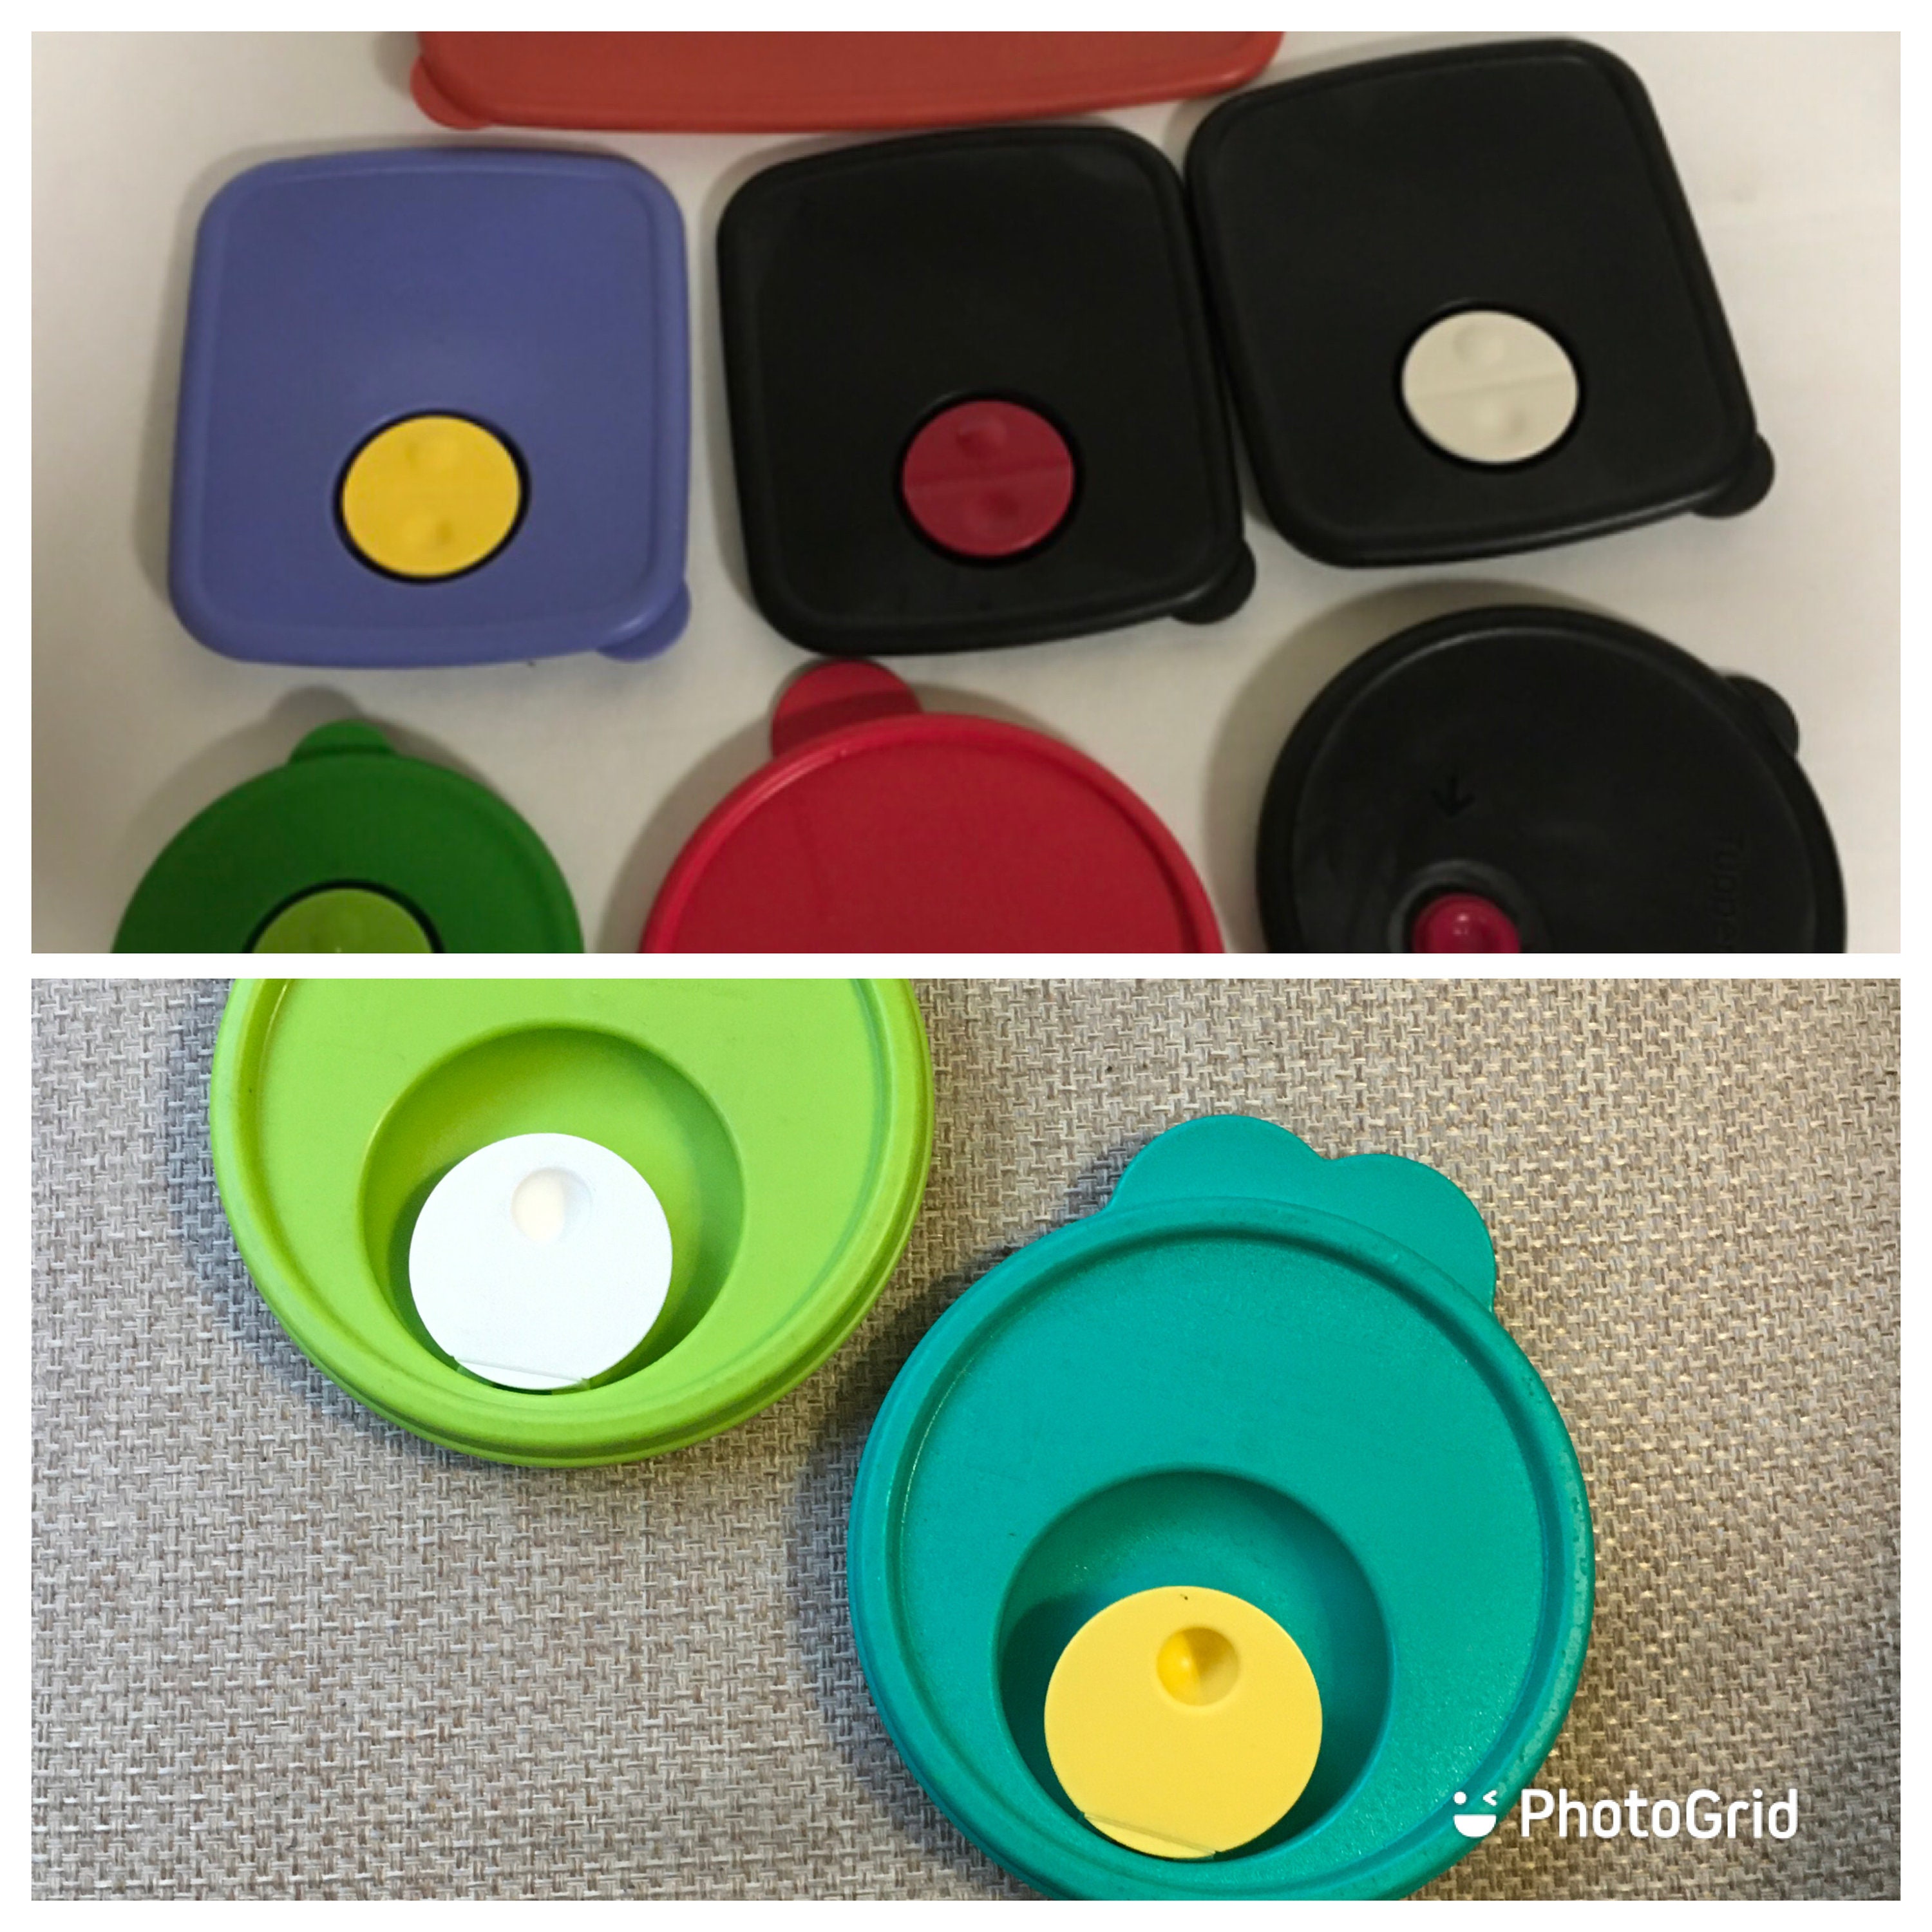 Vintage Tupperware Replacement Lids Choose Your Lid Wide Variety  Ask Me for Help Finding a Lid. READ DESCRIPTION 